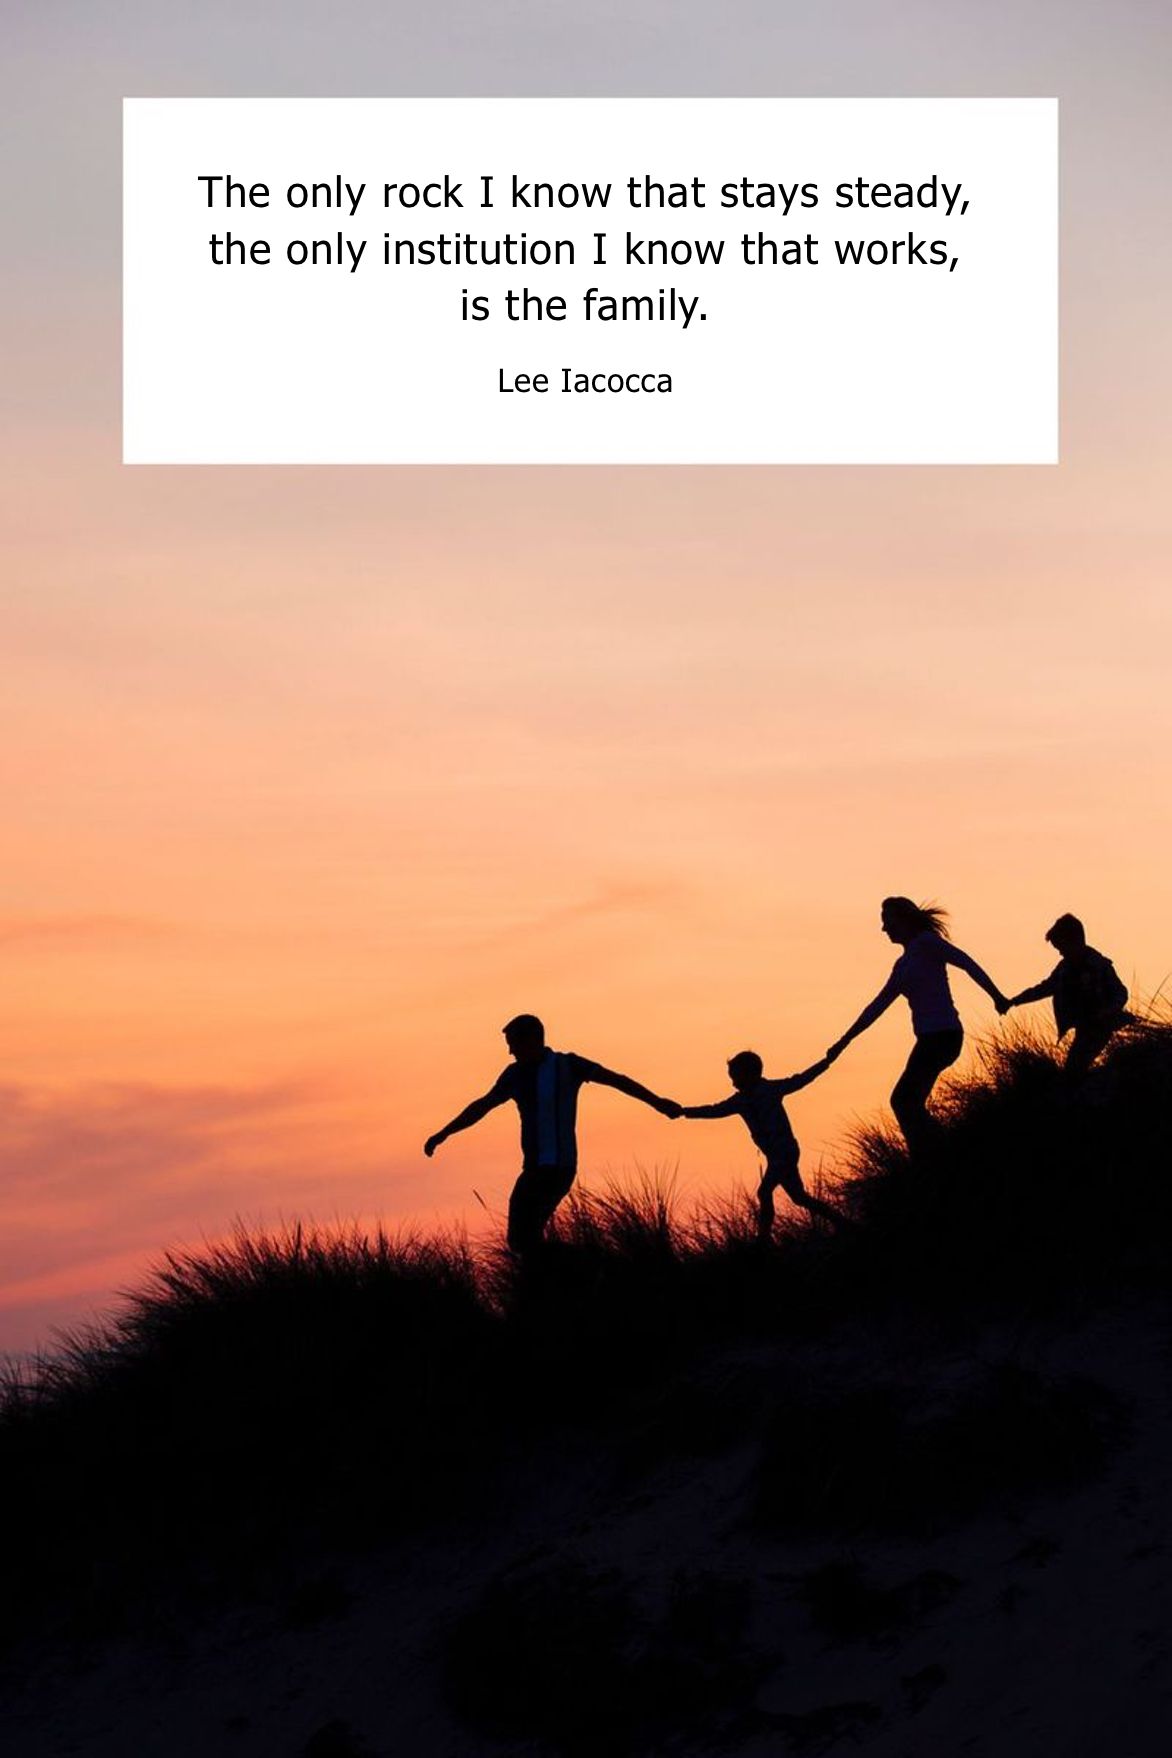 the only rock i know that stays steady, the only institution i know that works, is the family. lee iacocca